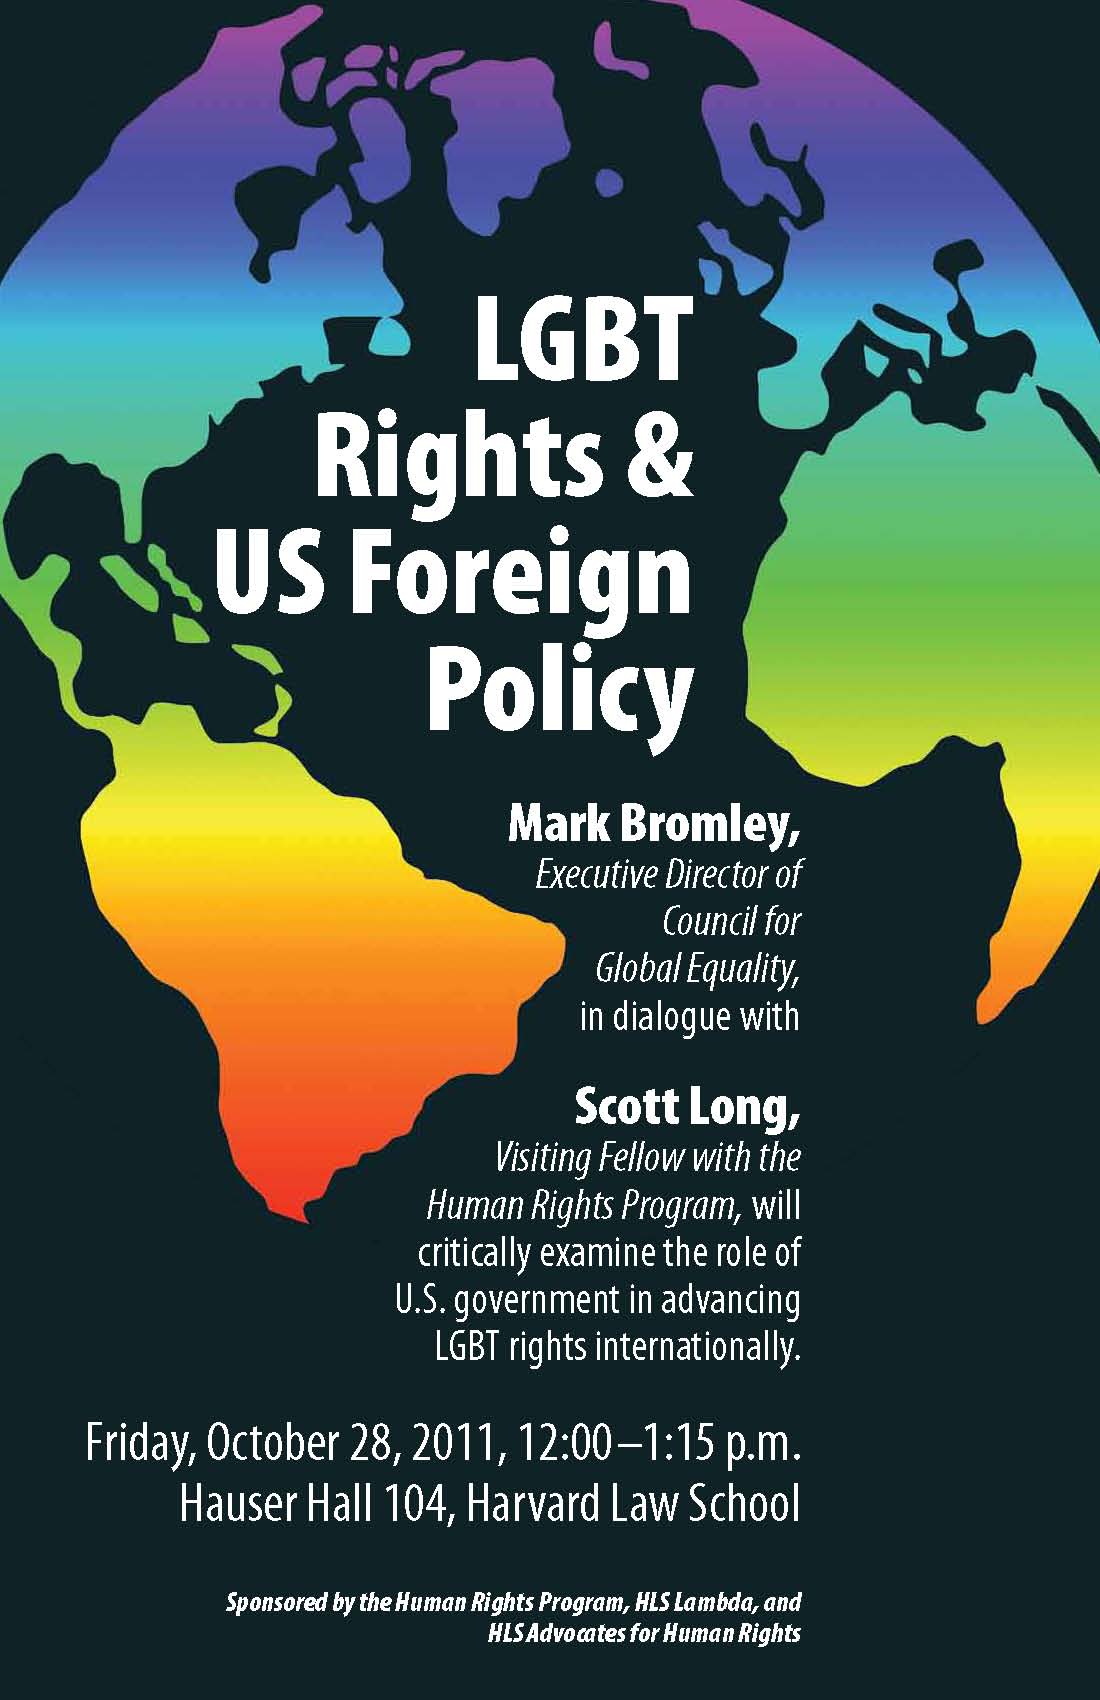 Poster with headline, "LGBT Rights & US Foreign Policy," with speakers Mark Bromley and Scott Long. Behind them is the image of a globe. The event will occur Friday October 28, 2011, at 12pm.